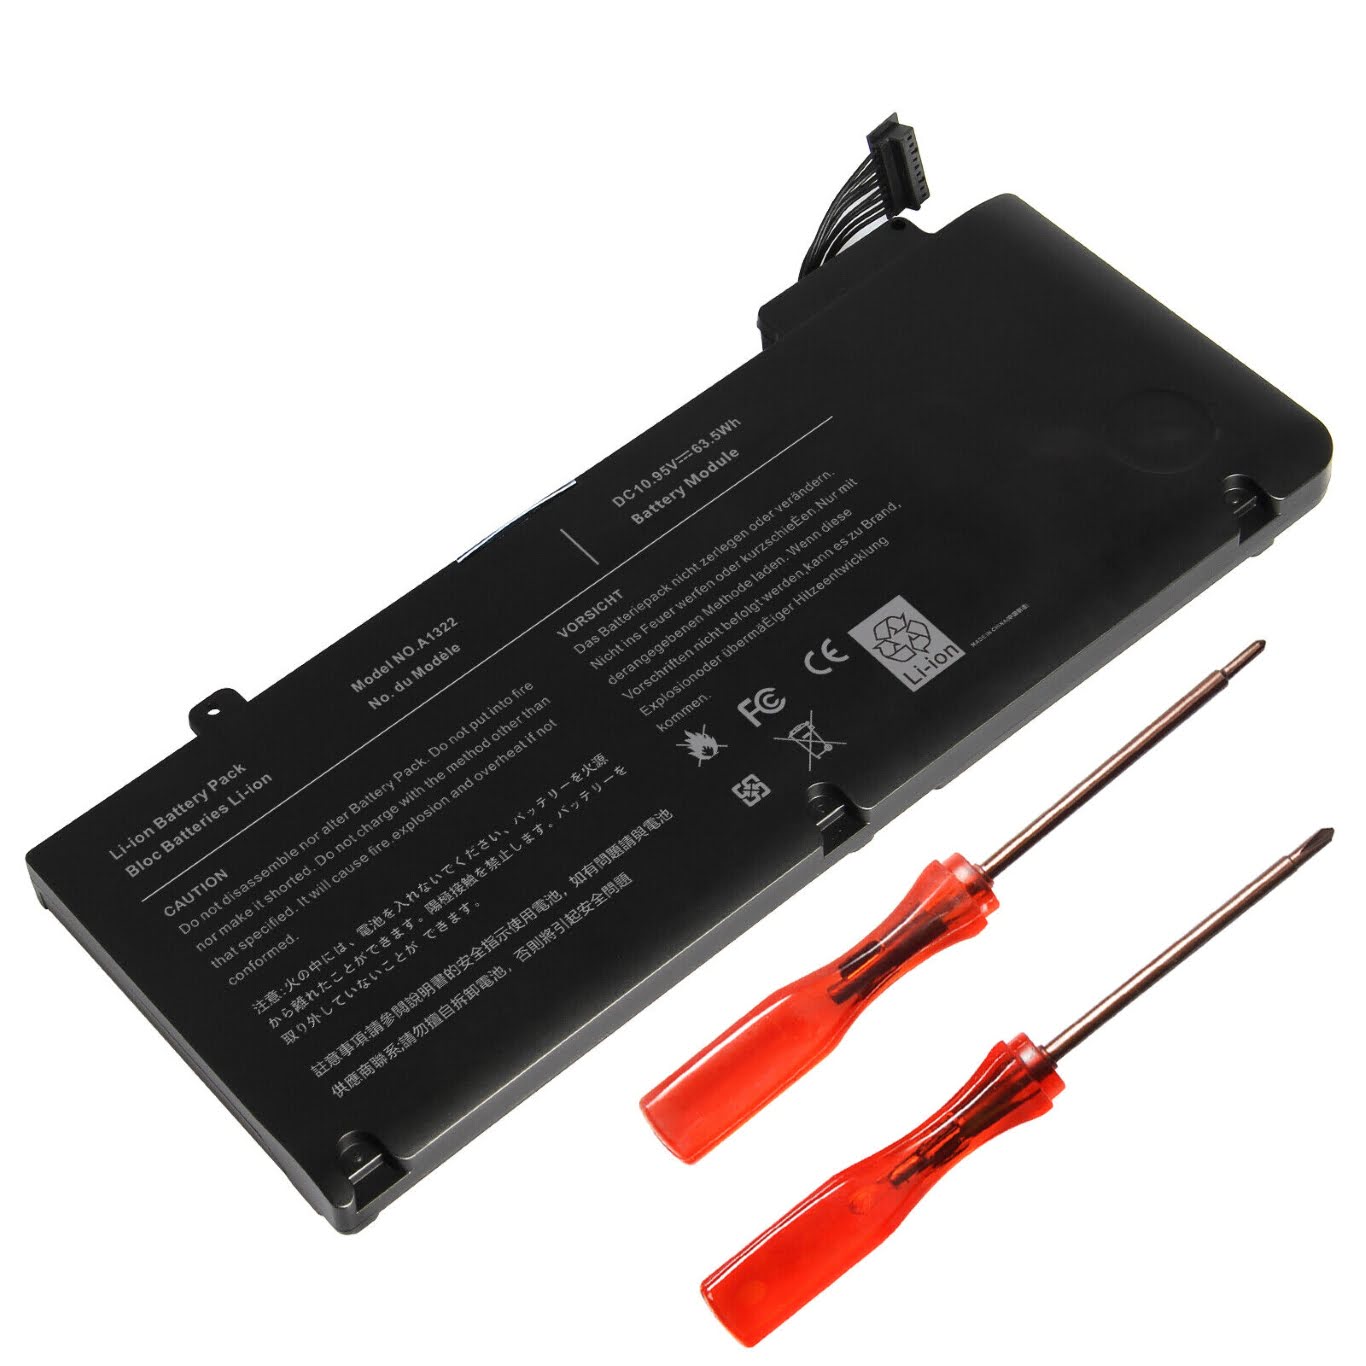 020-6547-A, 020-6765-A replacement Laptop Battery for Apple All Early 2011 13